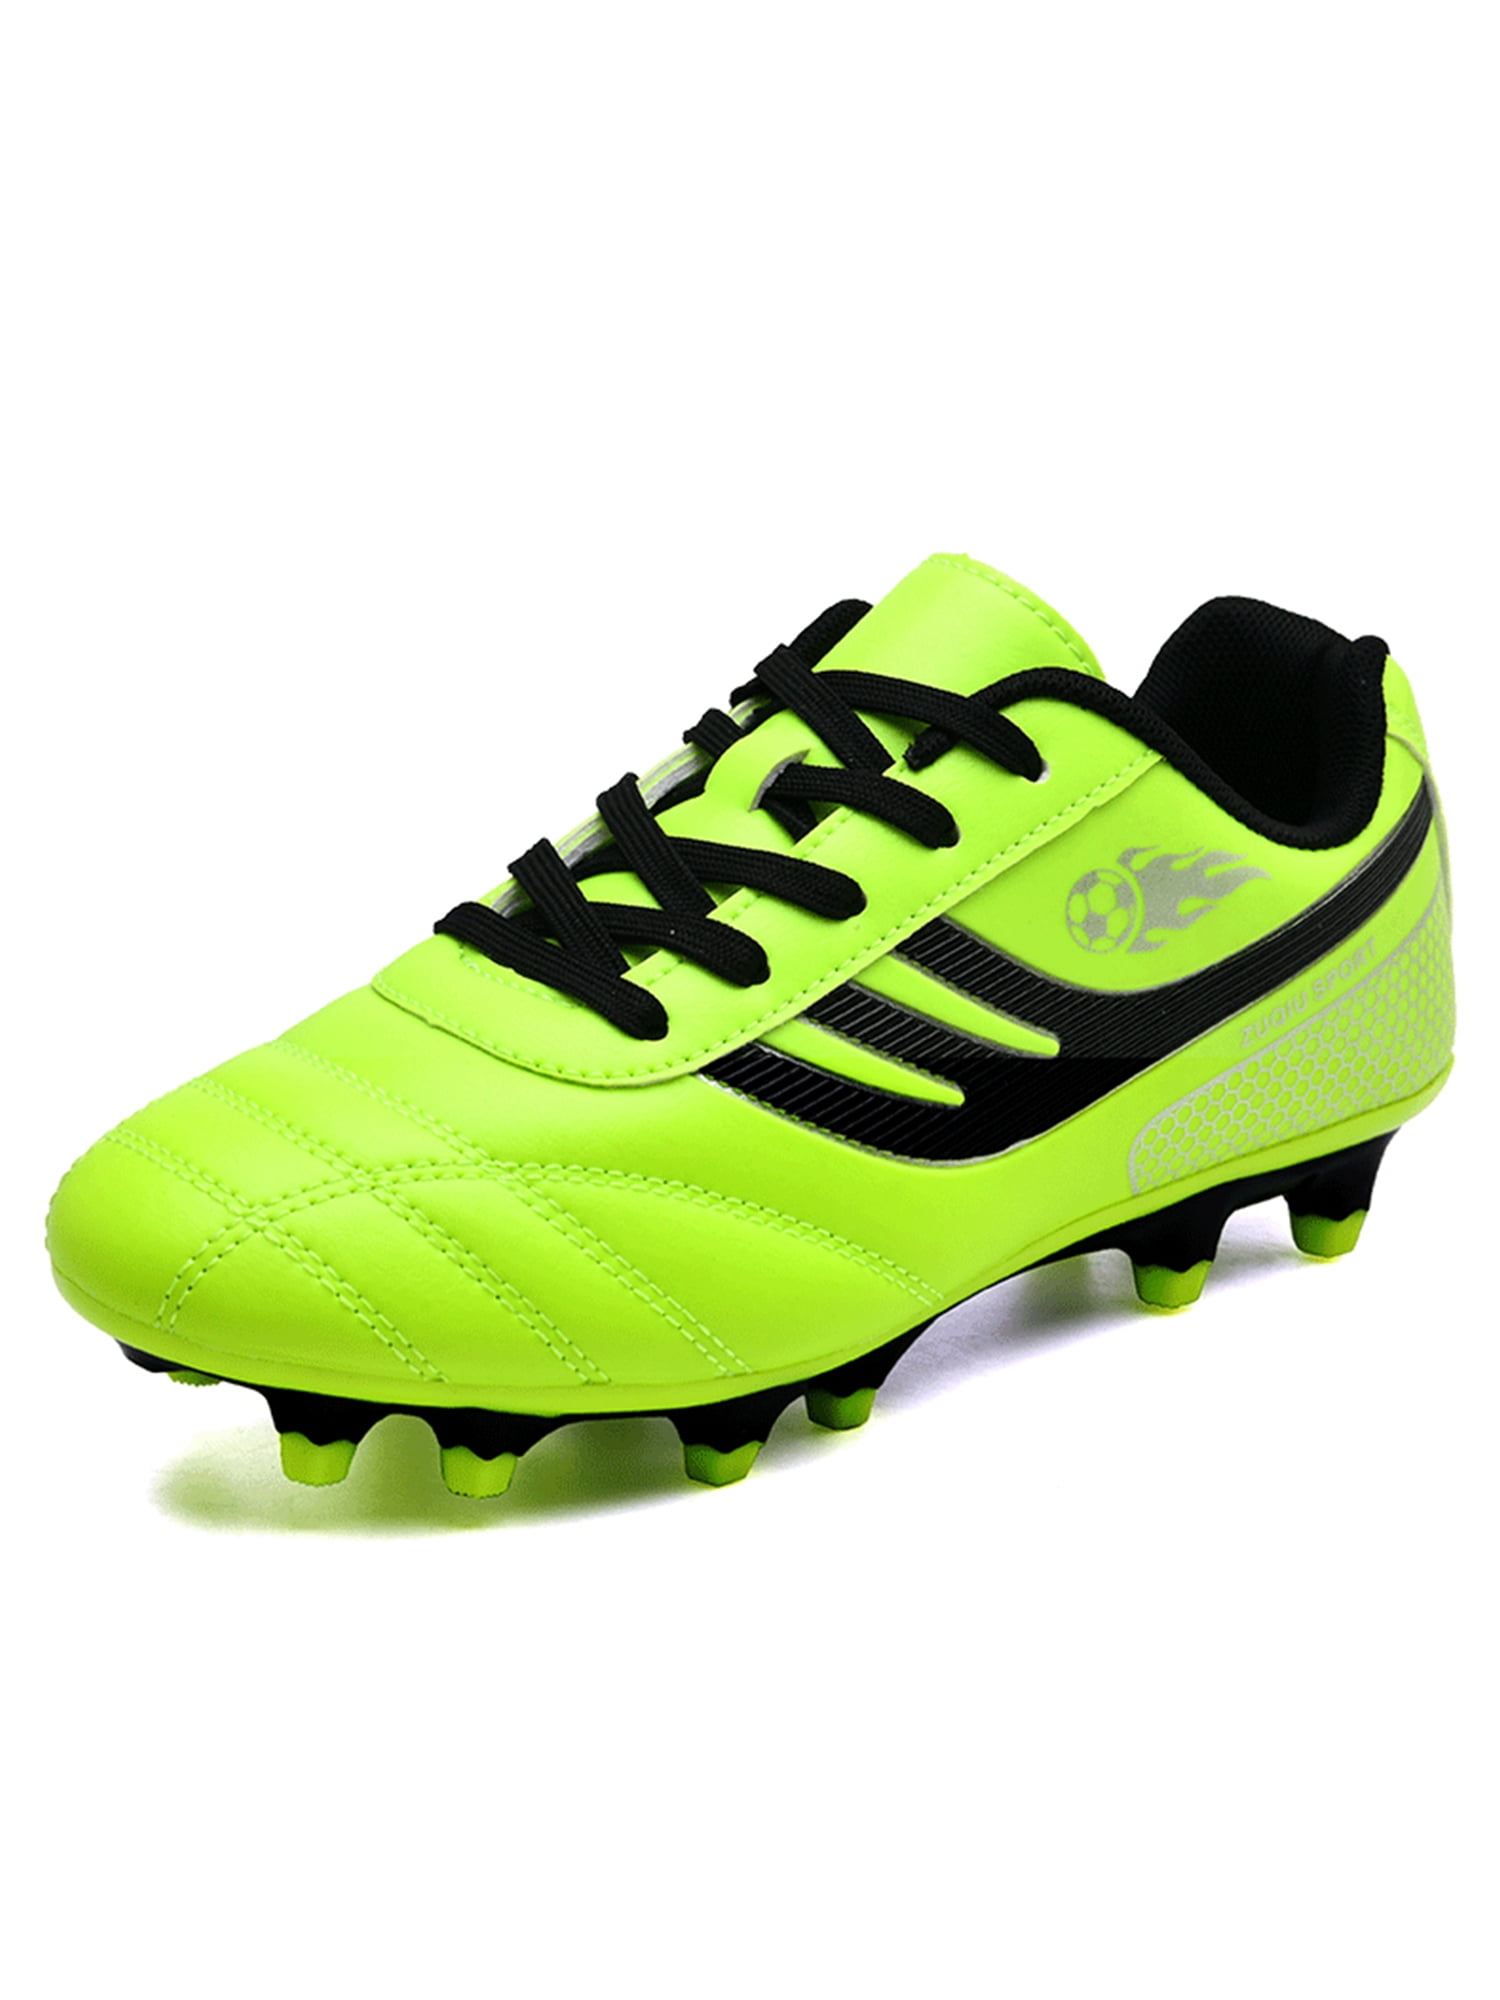 Football Shoes Boys Girls Football Boots Teenager Soccer Athletics Training Lace Up Shoes Indoor Outdoor Sports Touch Fastening Sneakers for Unisex Kids 